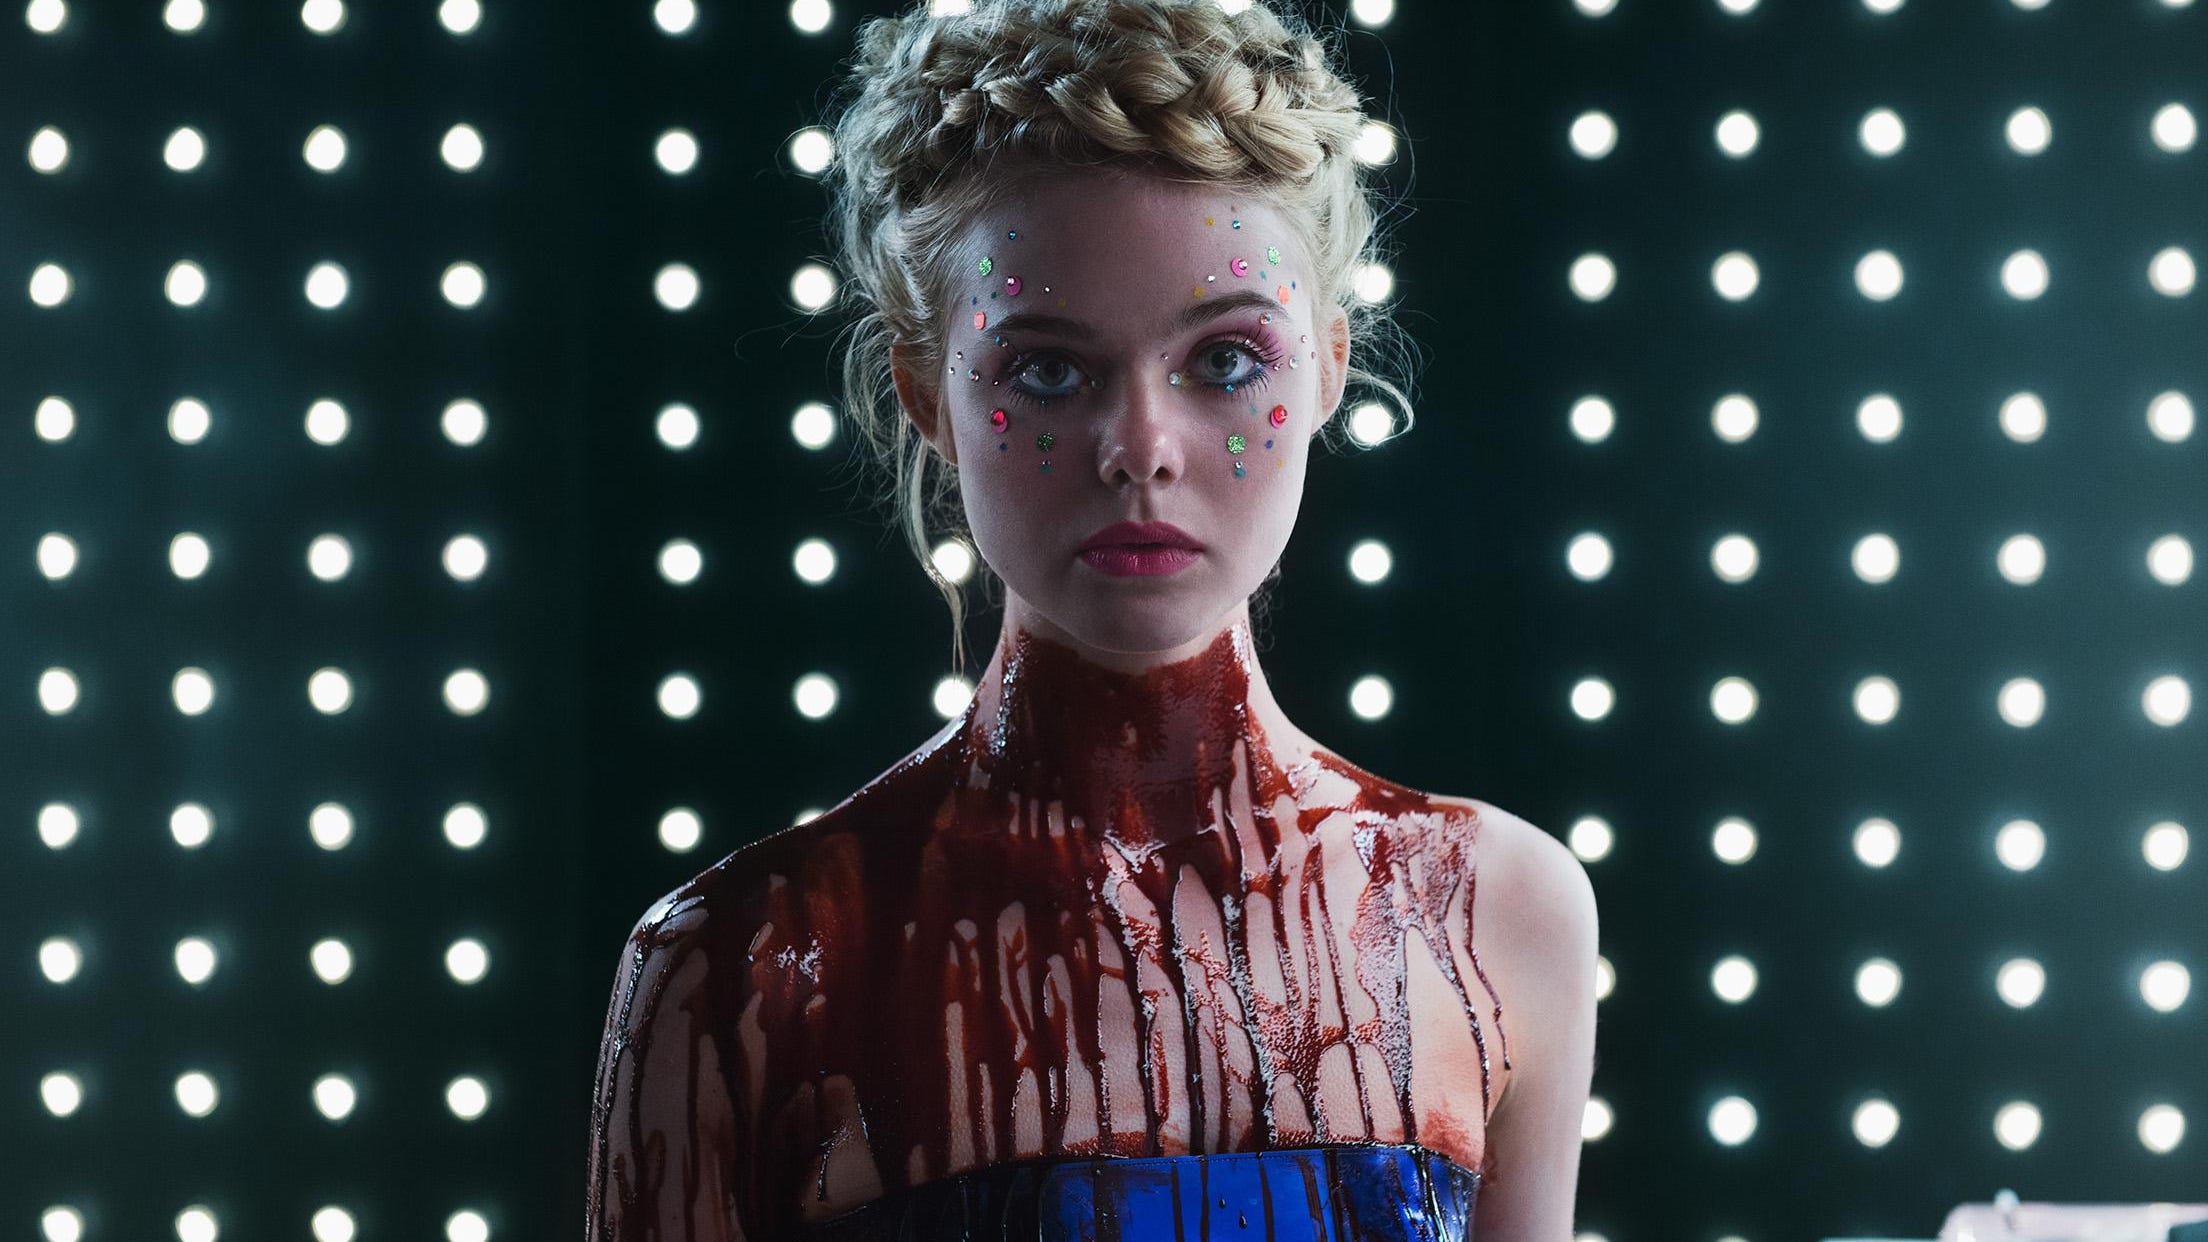 Neon demon nudity the Tits and